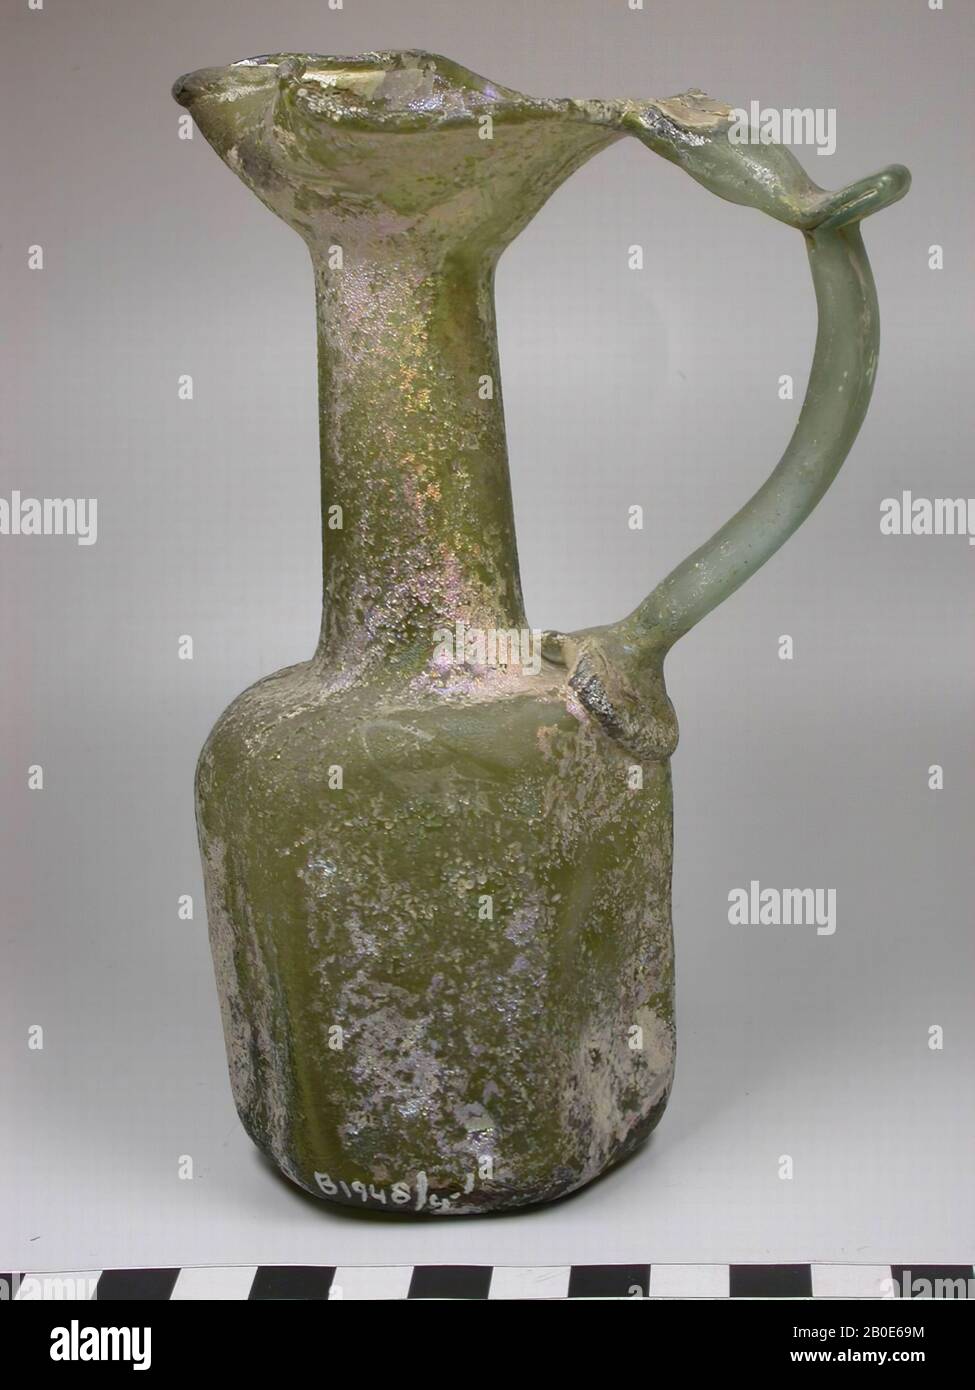 Syrian glass jug with an ear, cylindrical neck, wide mouth with squeezed spout and hexagonal shaped belly with vague relief decoration, tableware, glass, H 15.5 cm, Syria Stock Photo